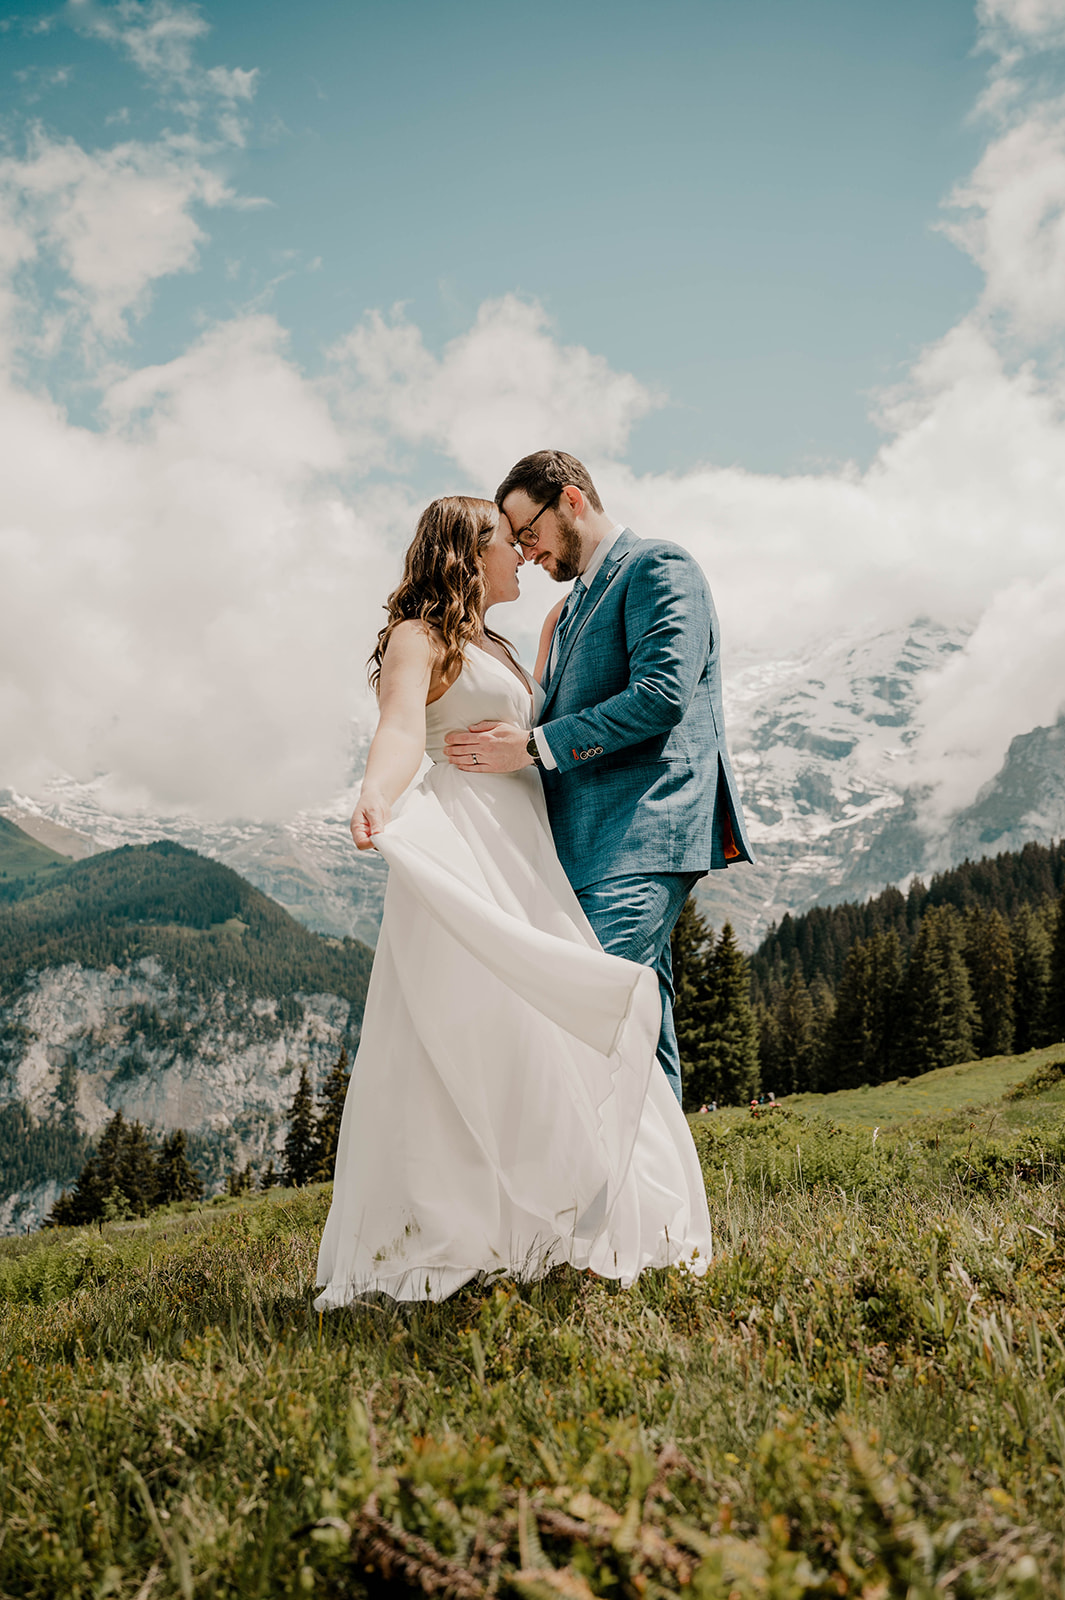 A couple shares a quiet moment after celebrating their love in an intimate ceremony above Lauterbrunnen